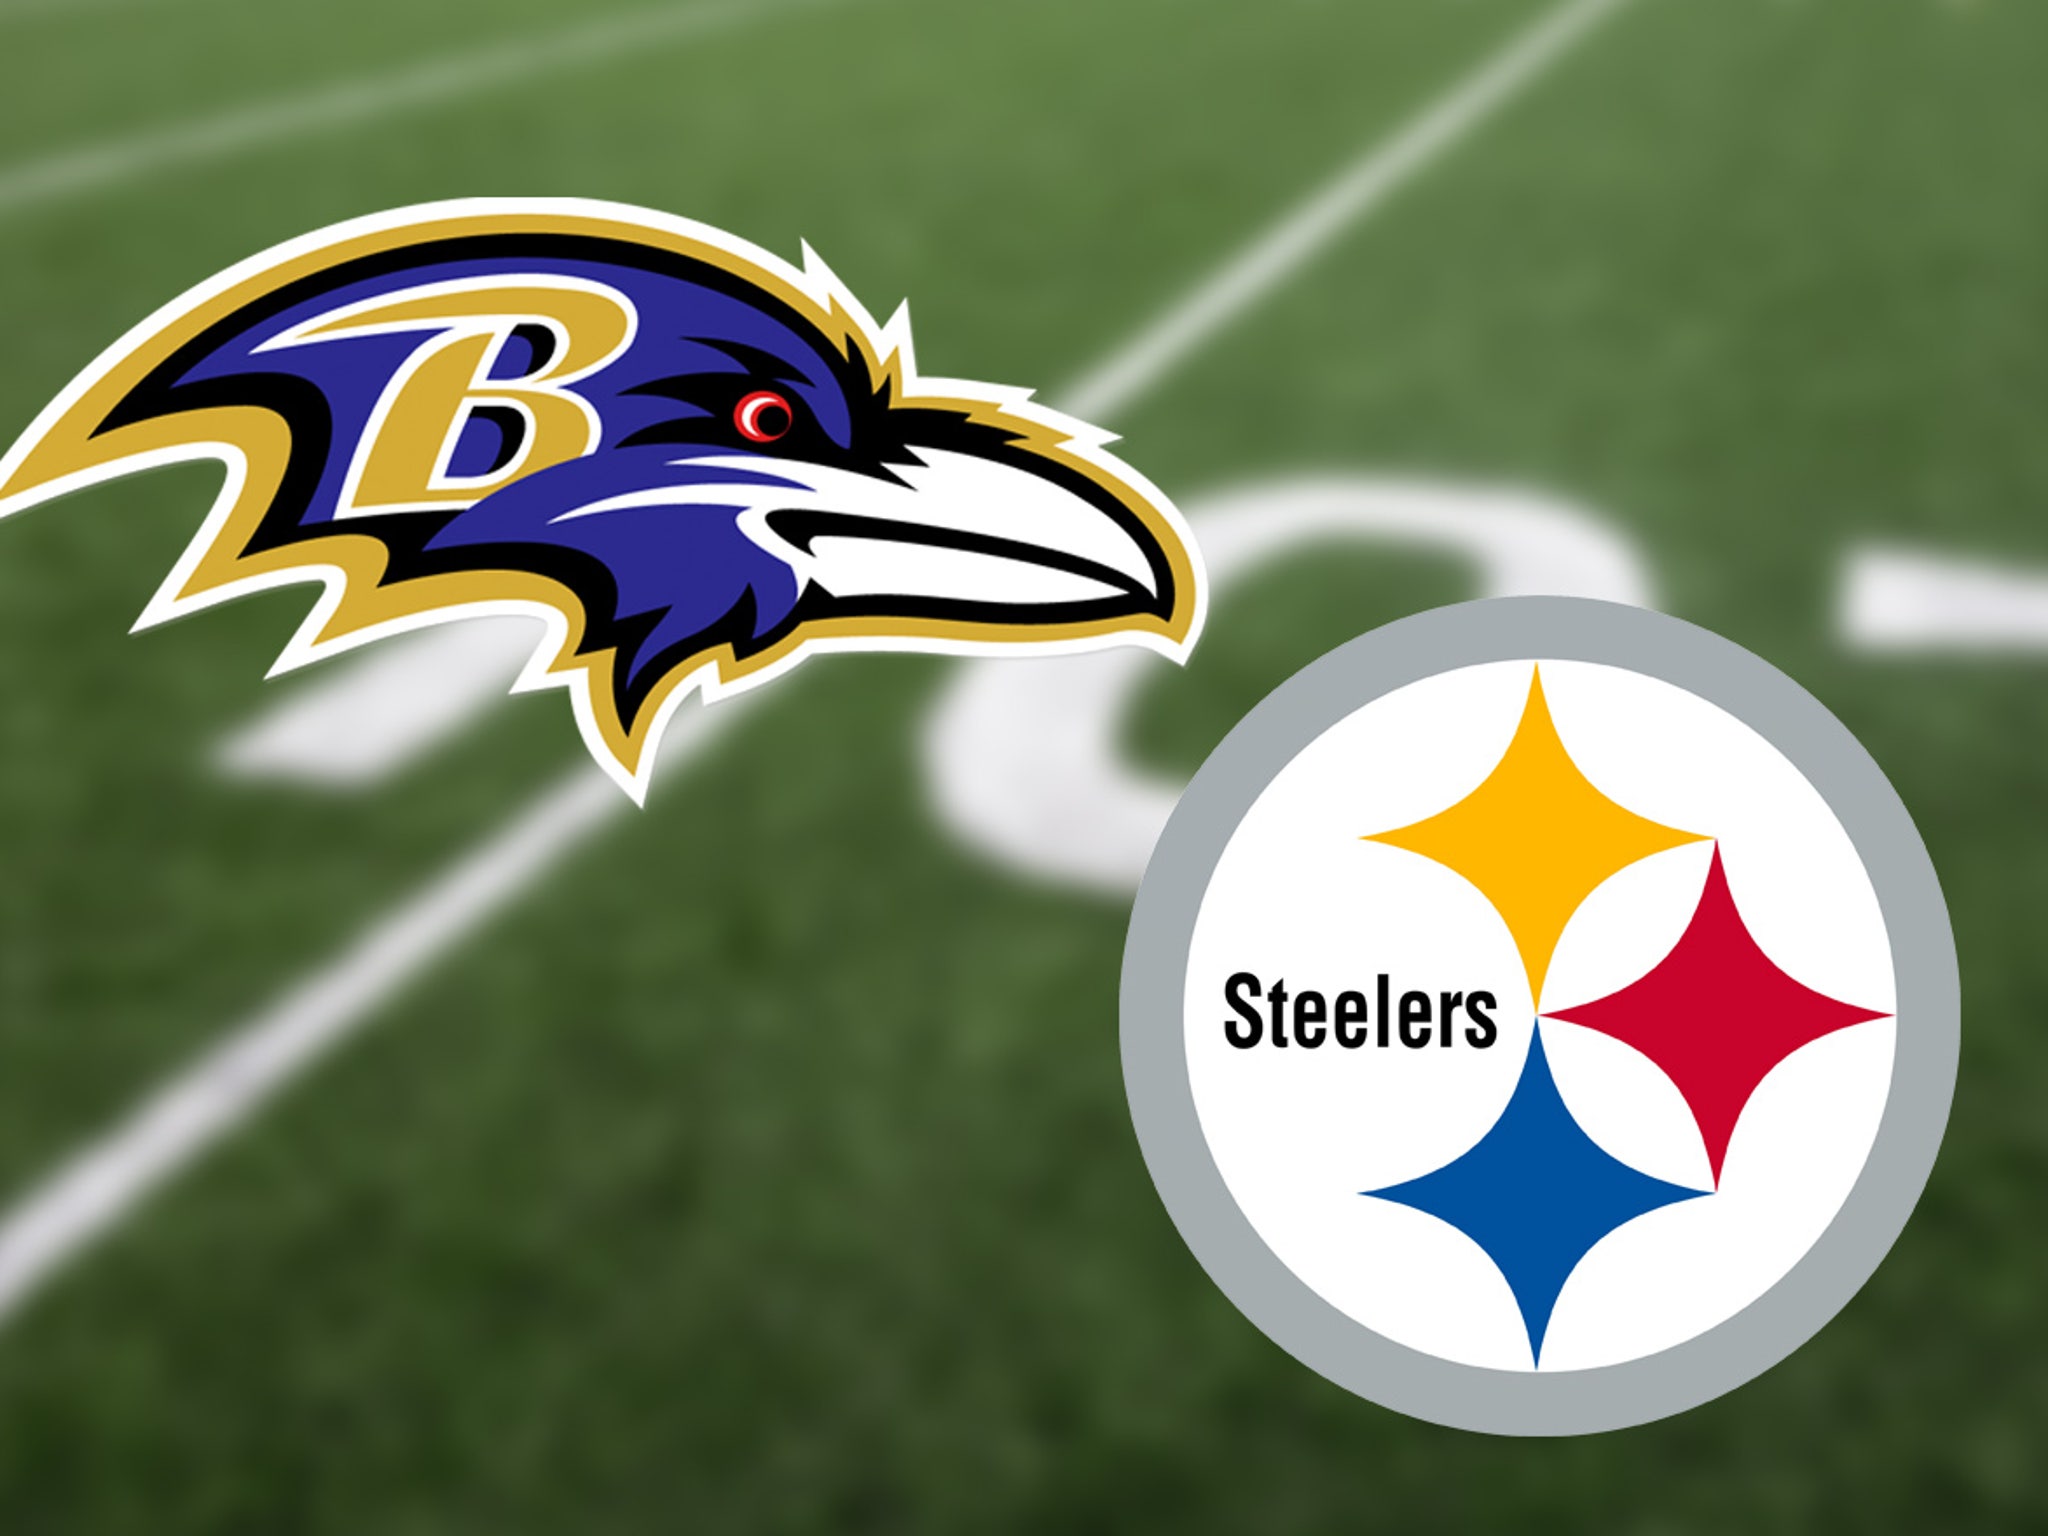 Ravens-Steelers Thanksgiving Day game postponed again due to COVID-19  outbreak - ABC News